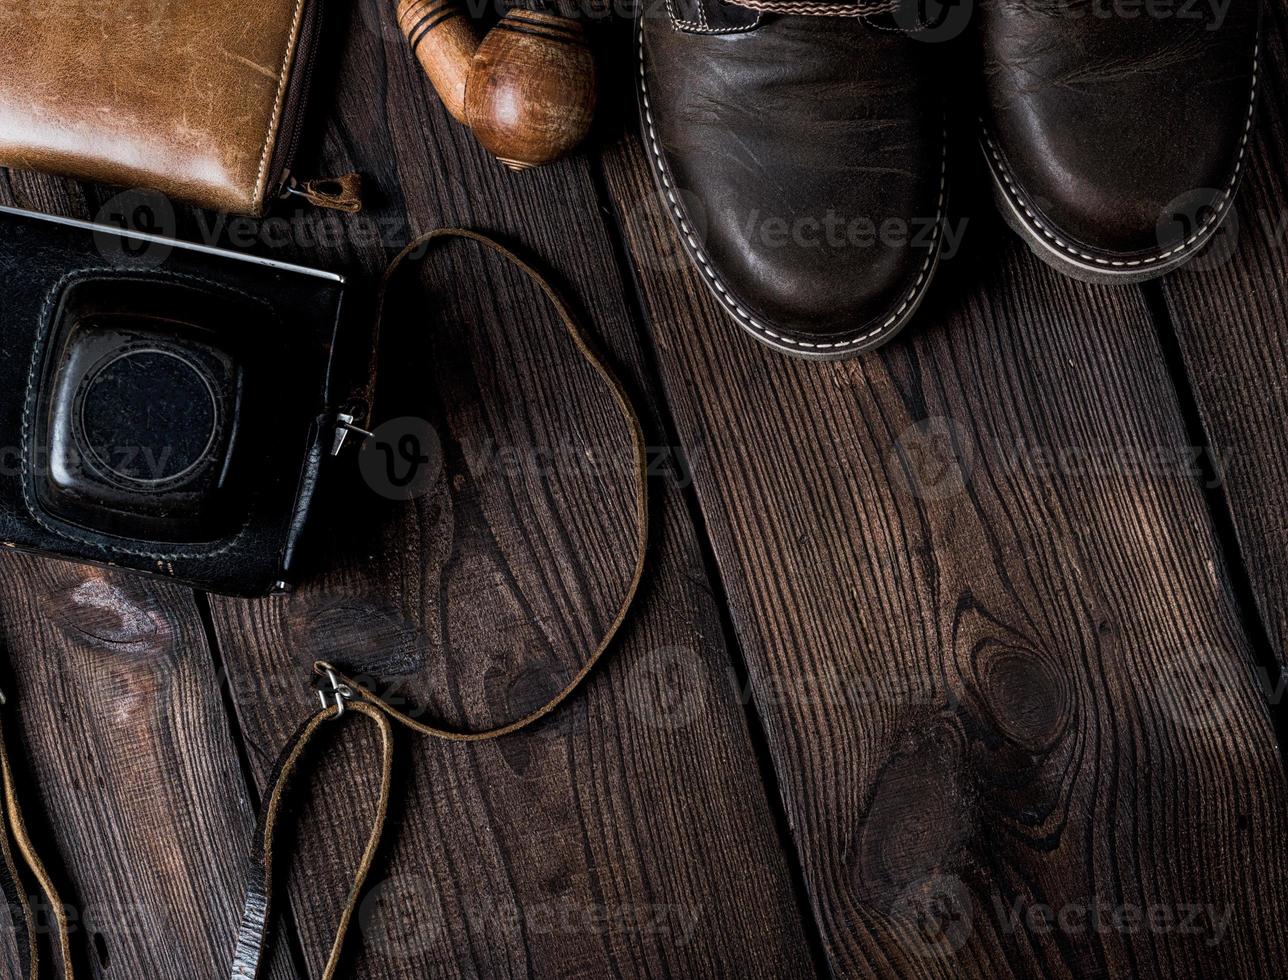 pair of leather brown shoes and an old vintage camera in a case photo